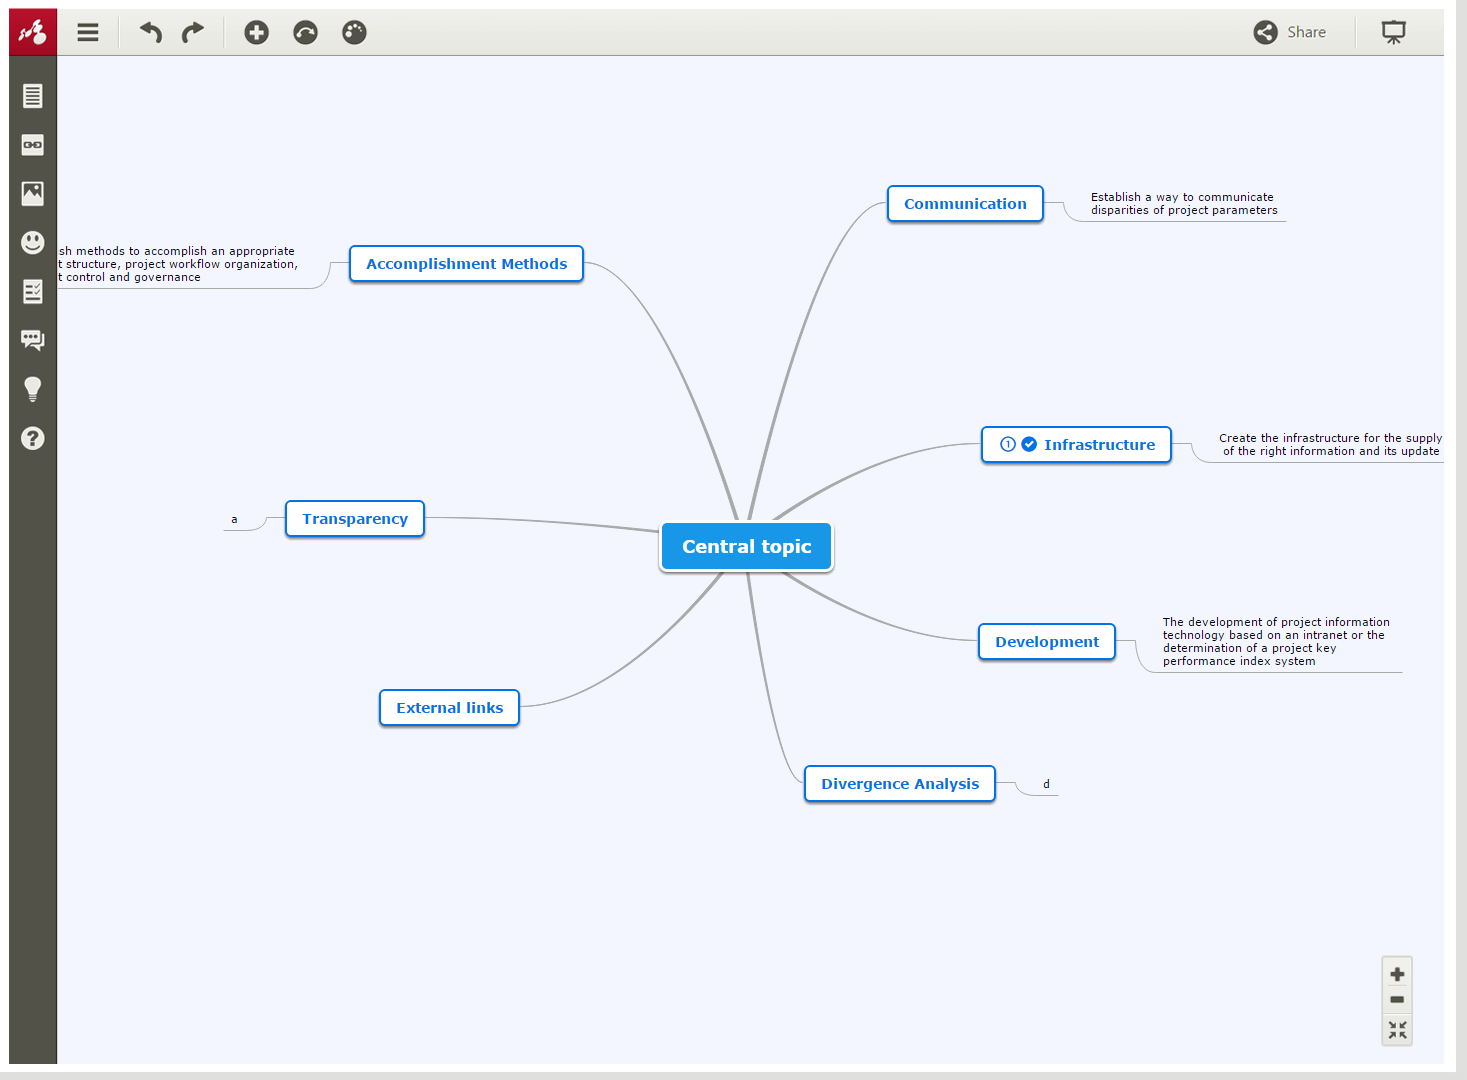 Mindomo is another option for mind mapping, concept mapping and outlining